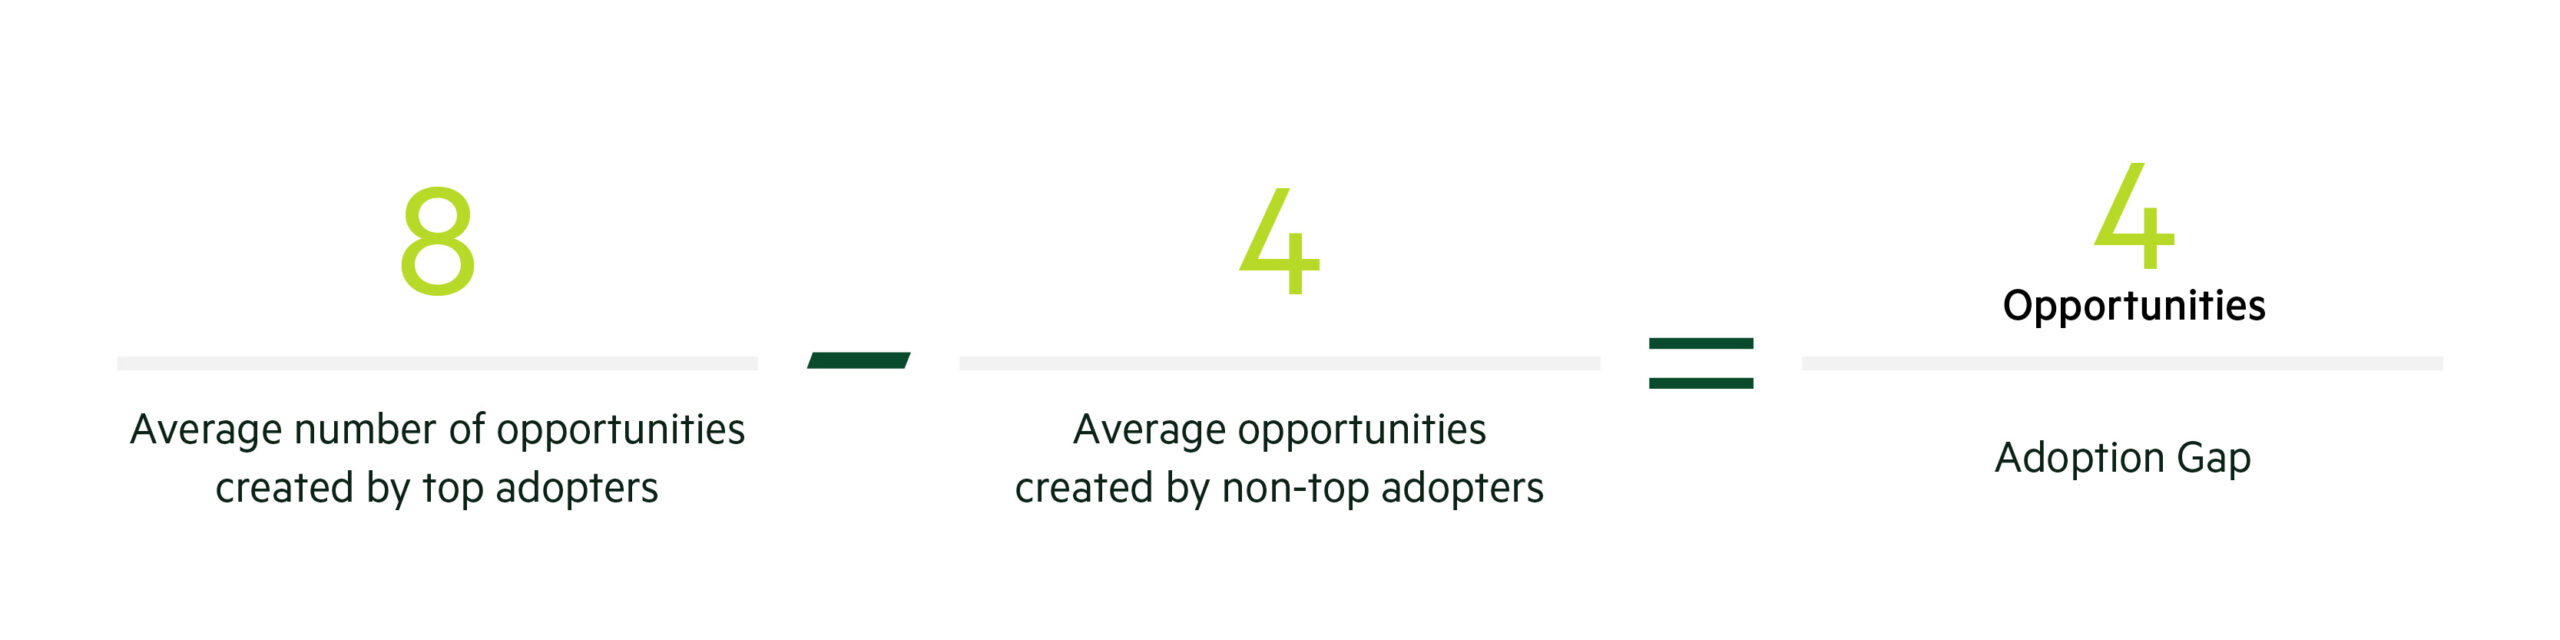 Average number of opportunities from top adotpers minus average number of opportunities of non adopters equals the adoption gap